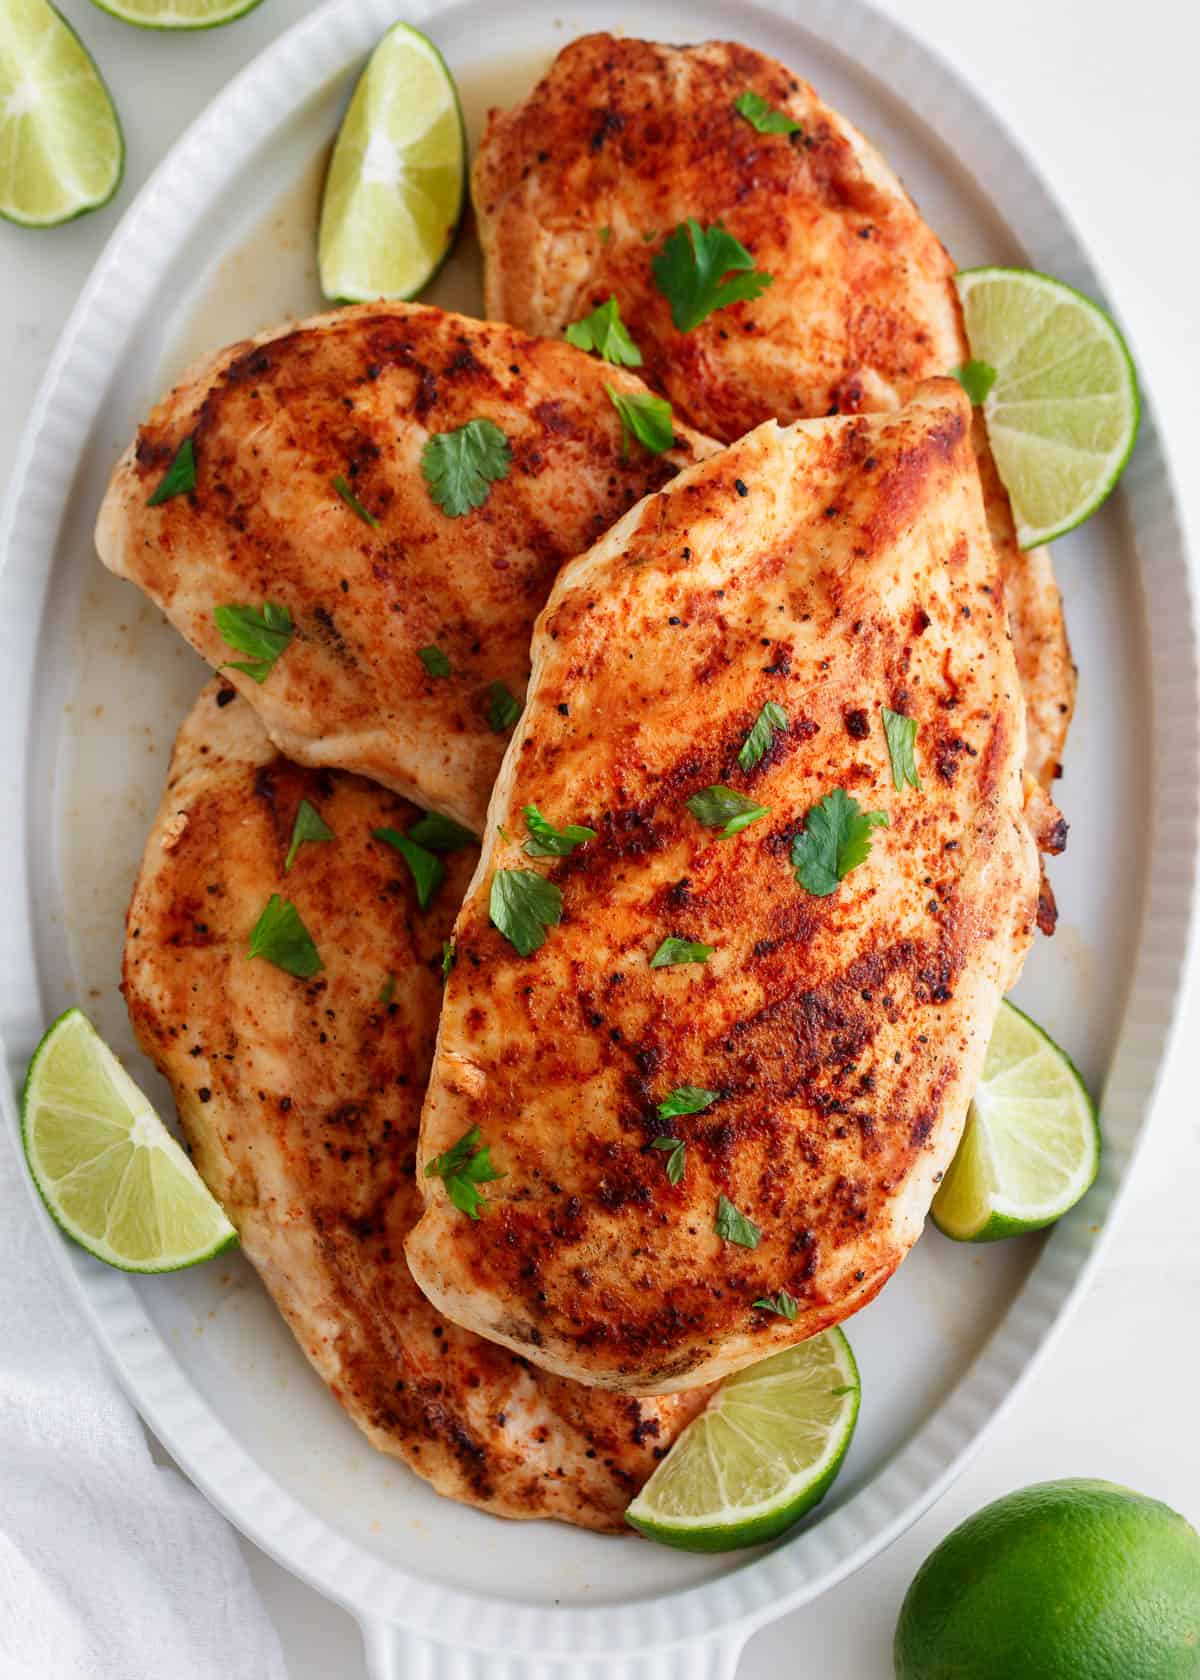 Grilled chicken breast on a white plate.